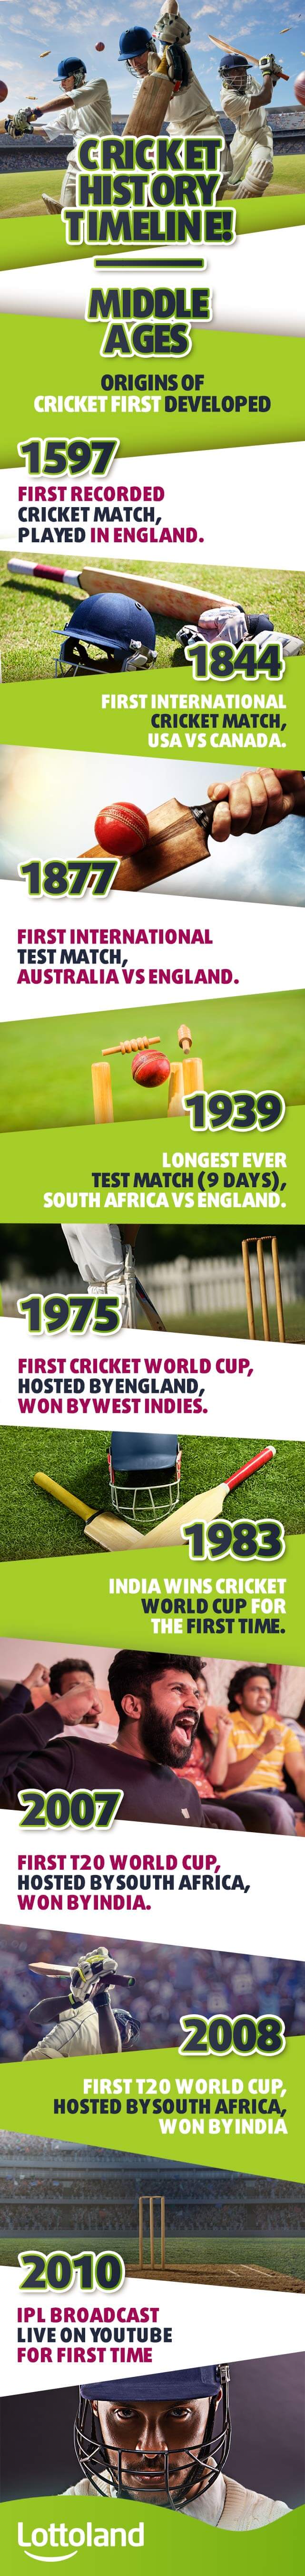 Infographic showing the history of Cricket for article on cricket betting tips